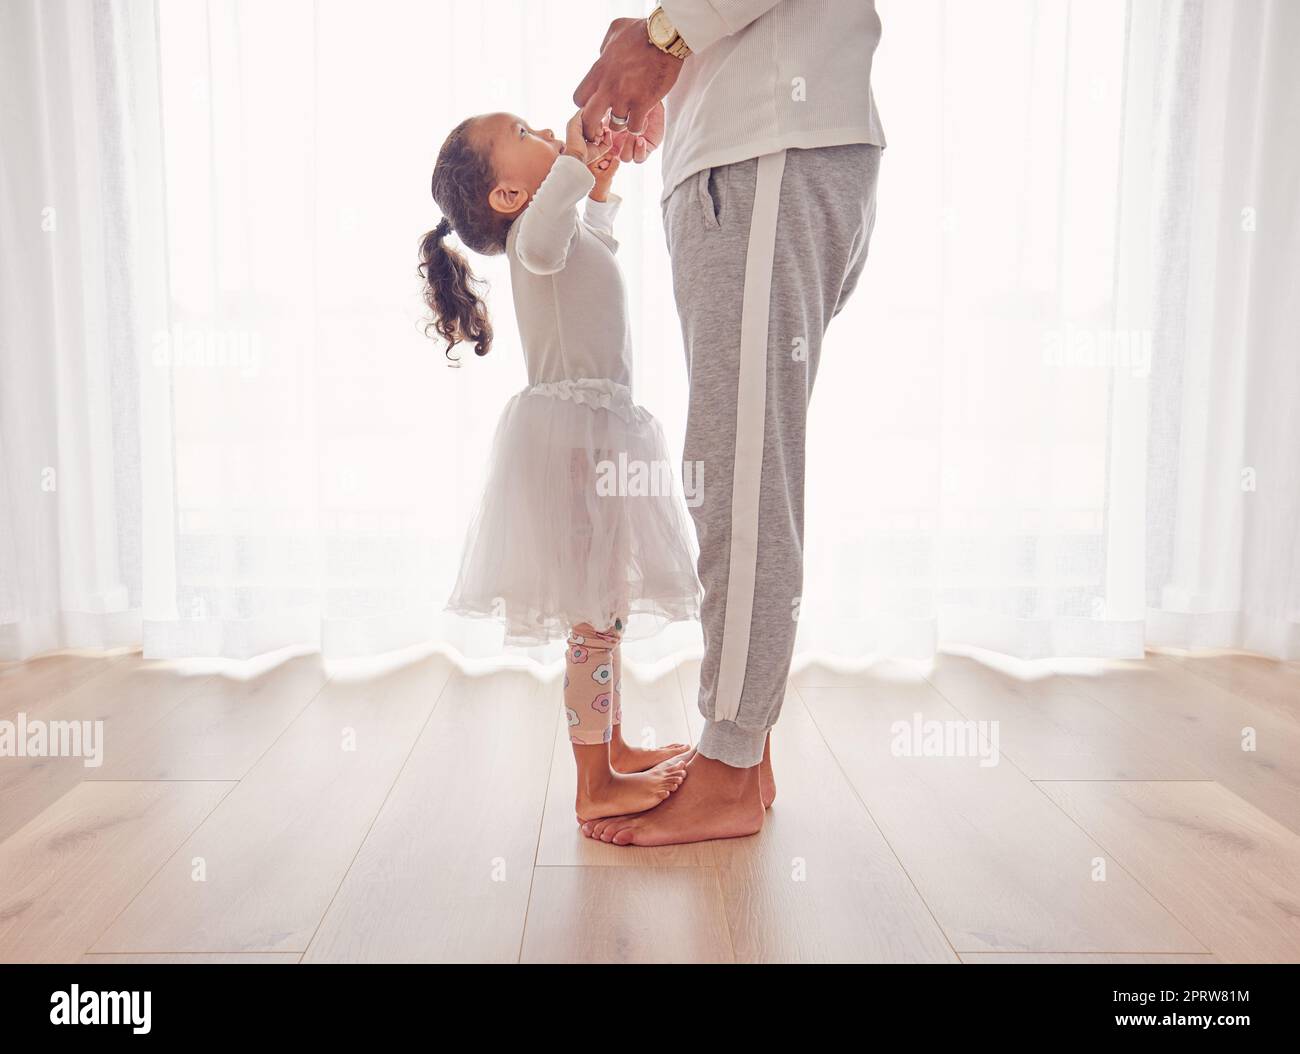 Family, dance and daughter on dad feet together on floor of interior for happiness, childhood and bonding. Care, love and youth with father dancing with child, walking on foot step for support Stock Photo